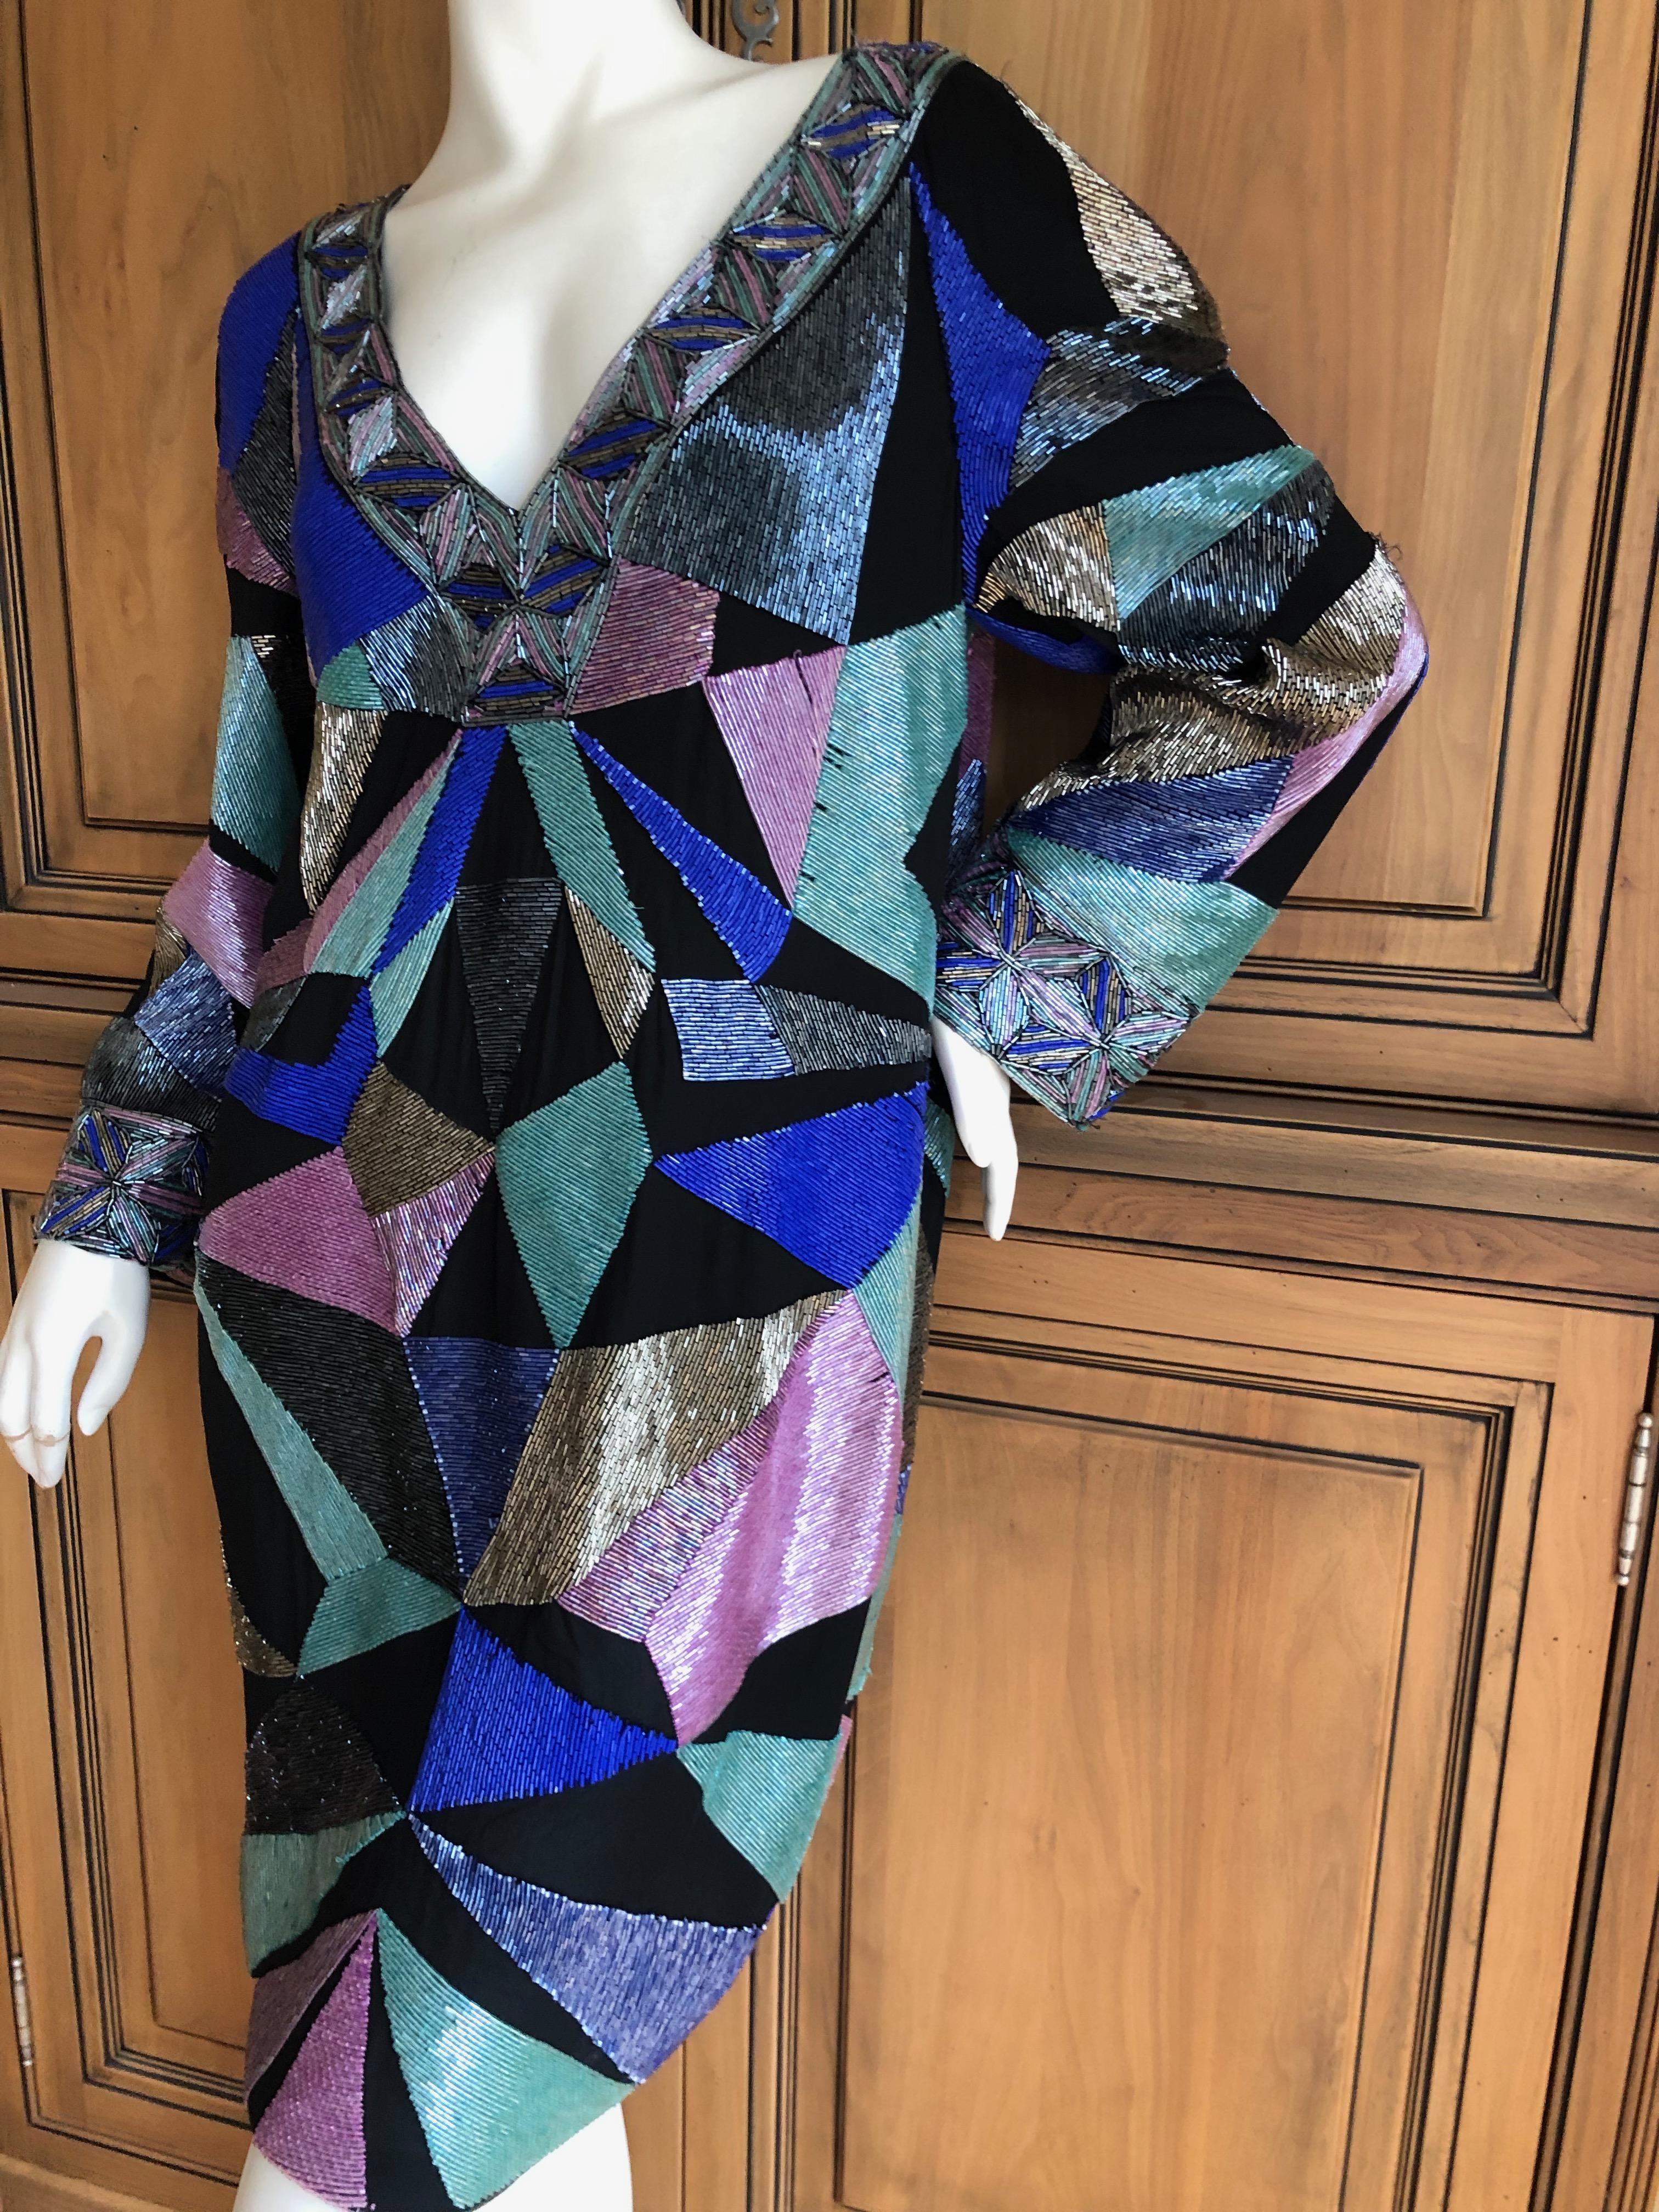 
Emilio Pucci Rare Embellished Cocktail Dress .
This still has the store tags attached, the retail was $7260 USD
WOW 
Rare to see a completely embellished Pucci before, this is unreal.
The beads are glass, and this is quite heavy.
Size 42
Bust  38